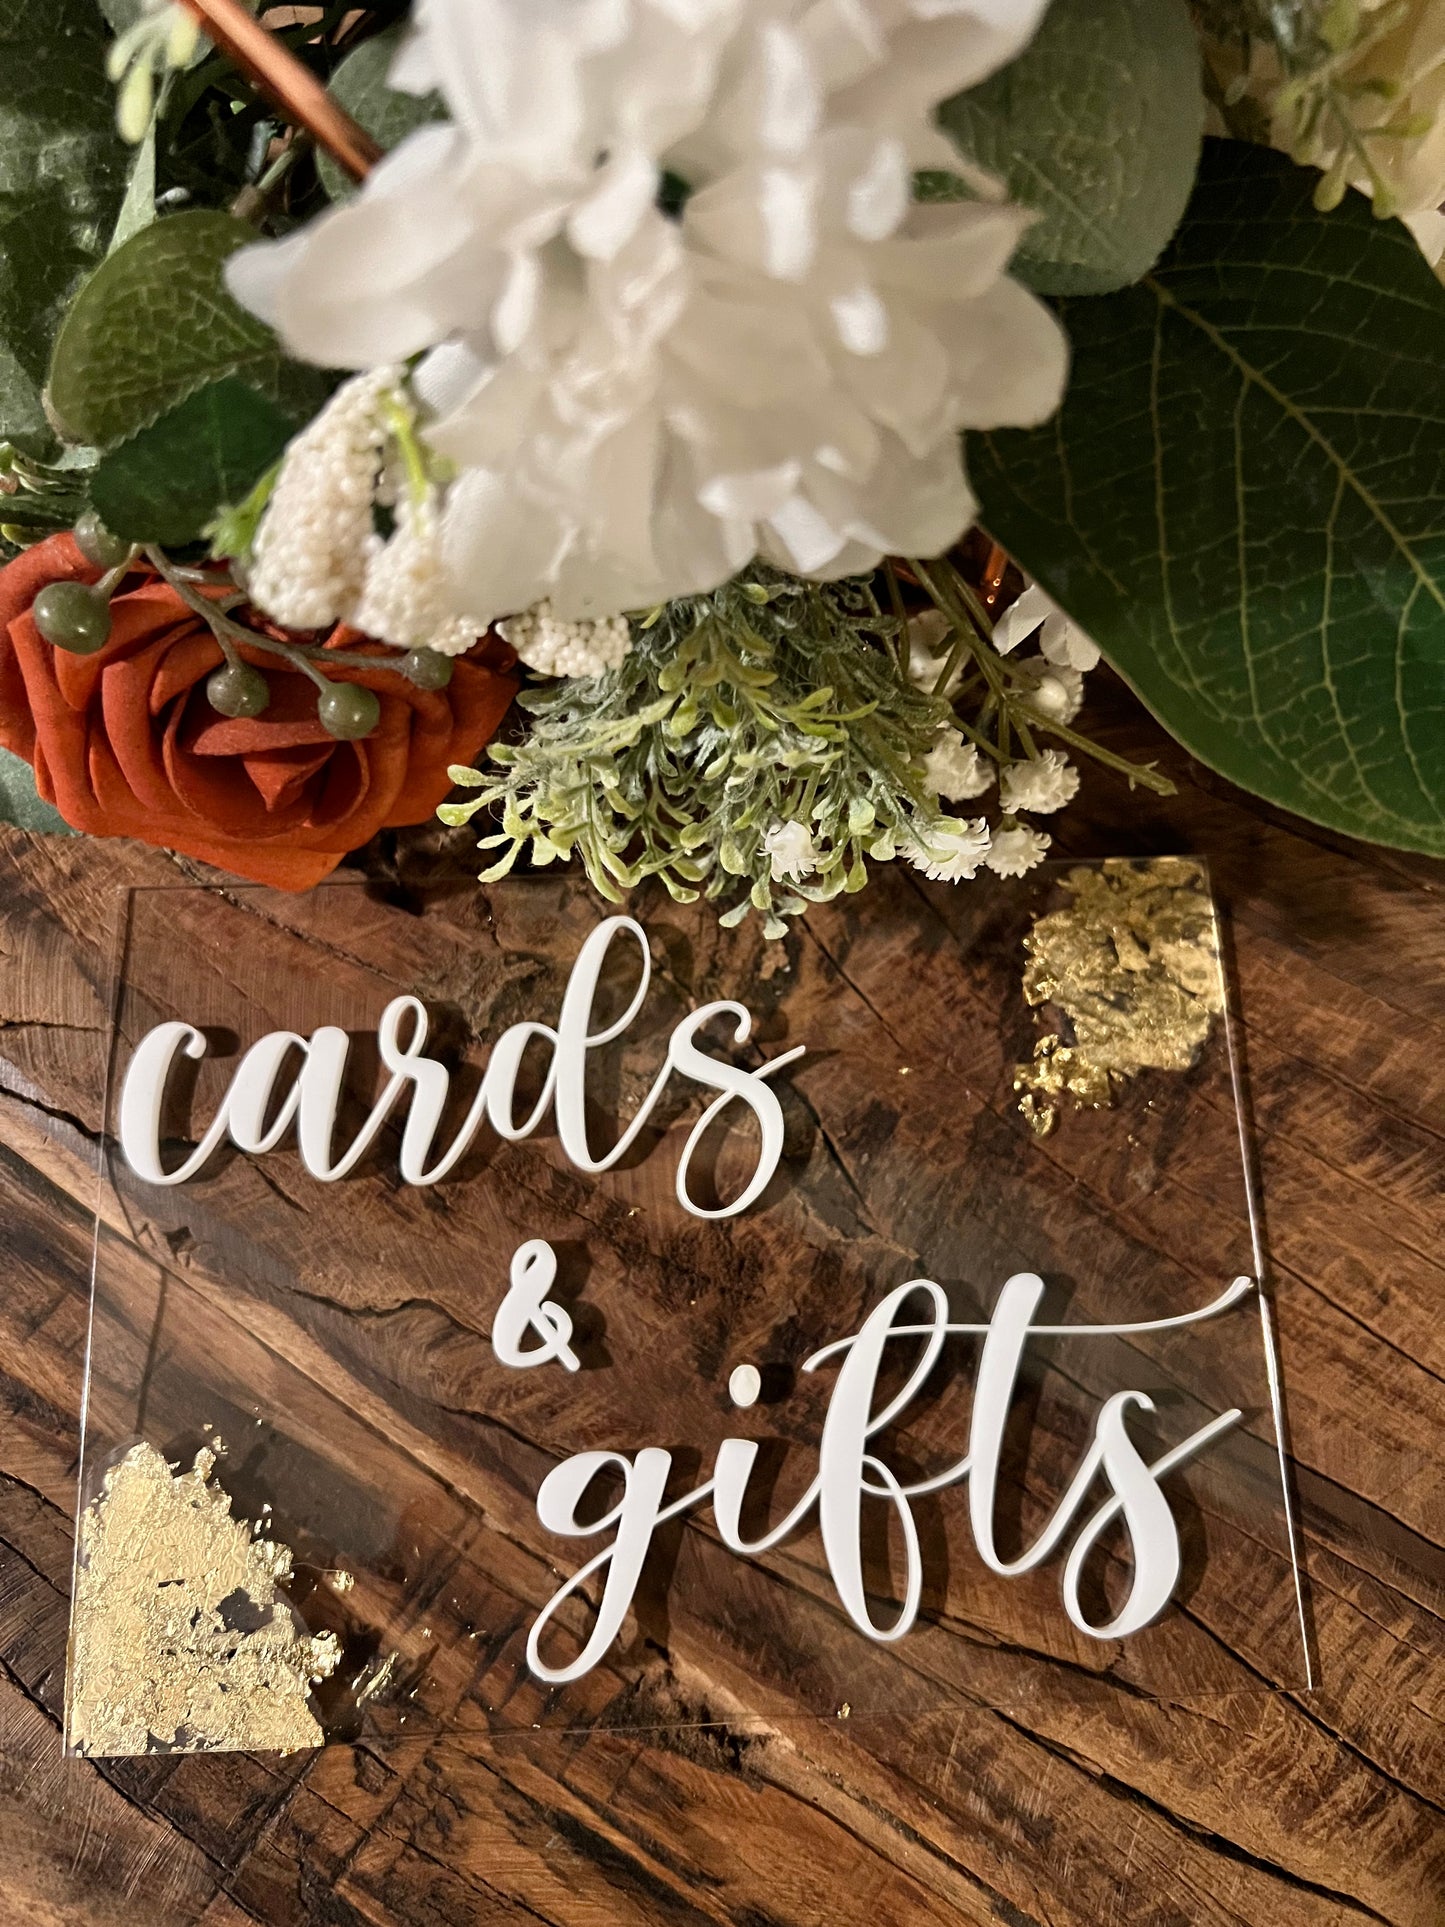 Custom Cards and Gifts